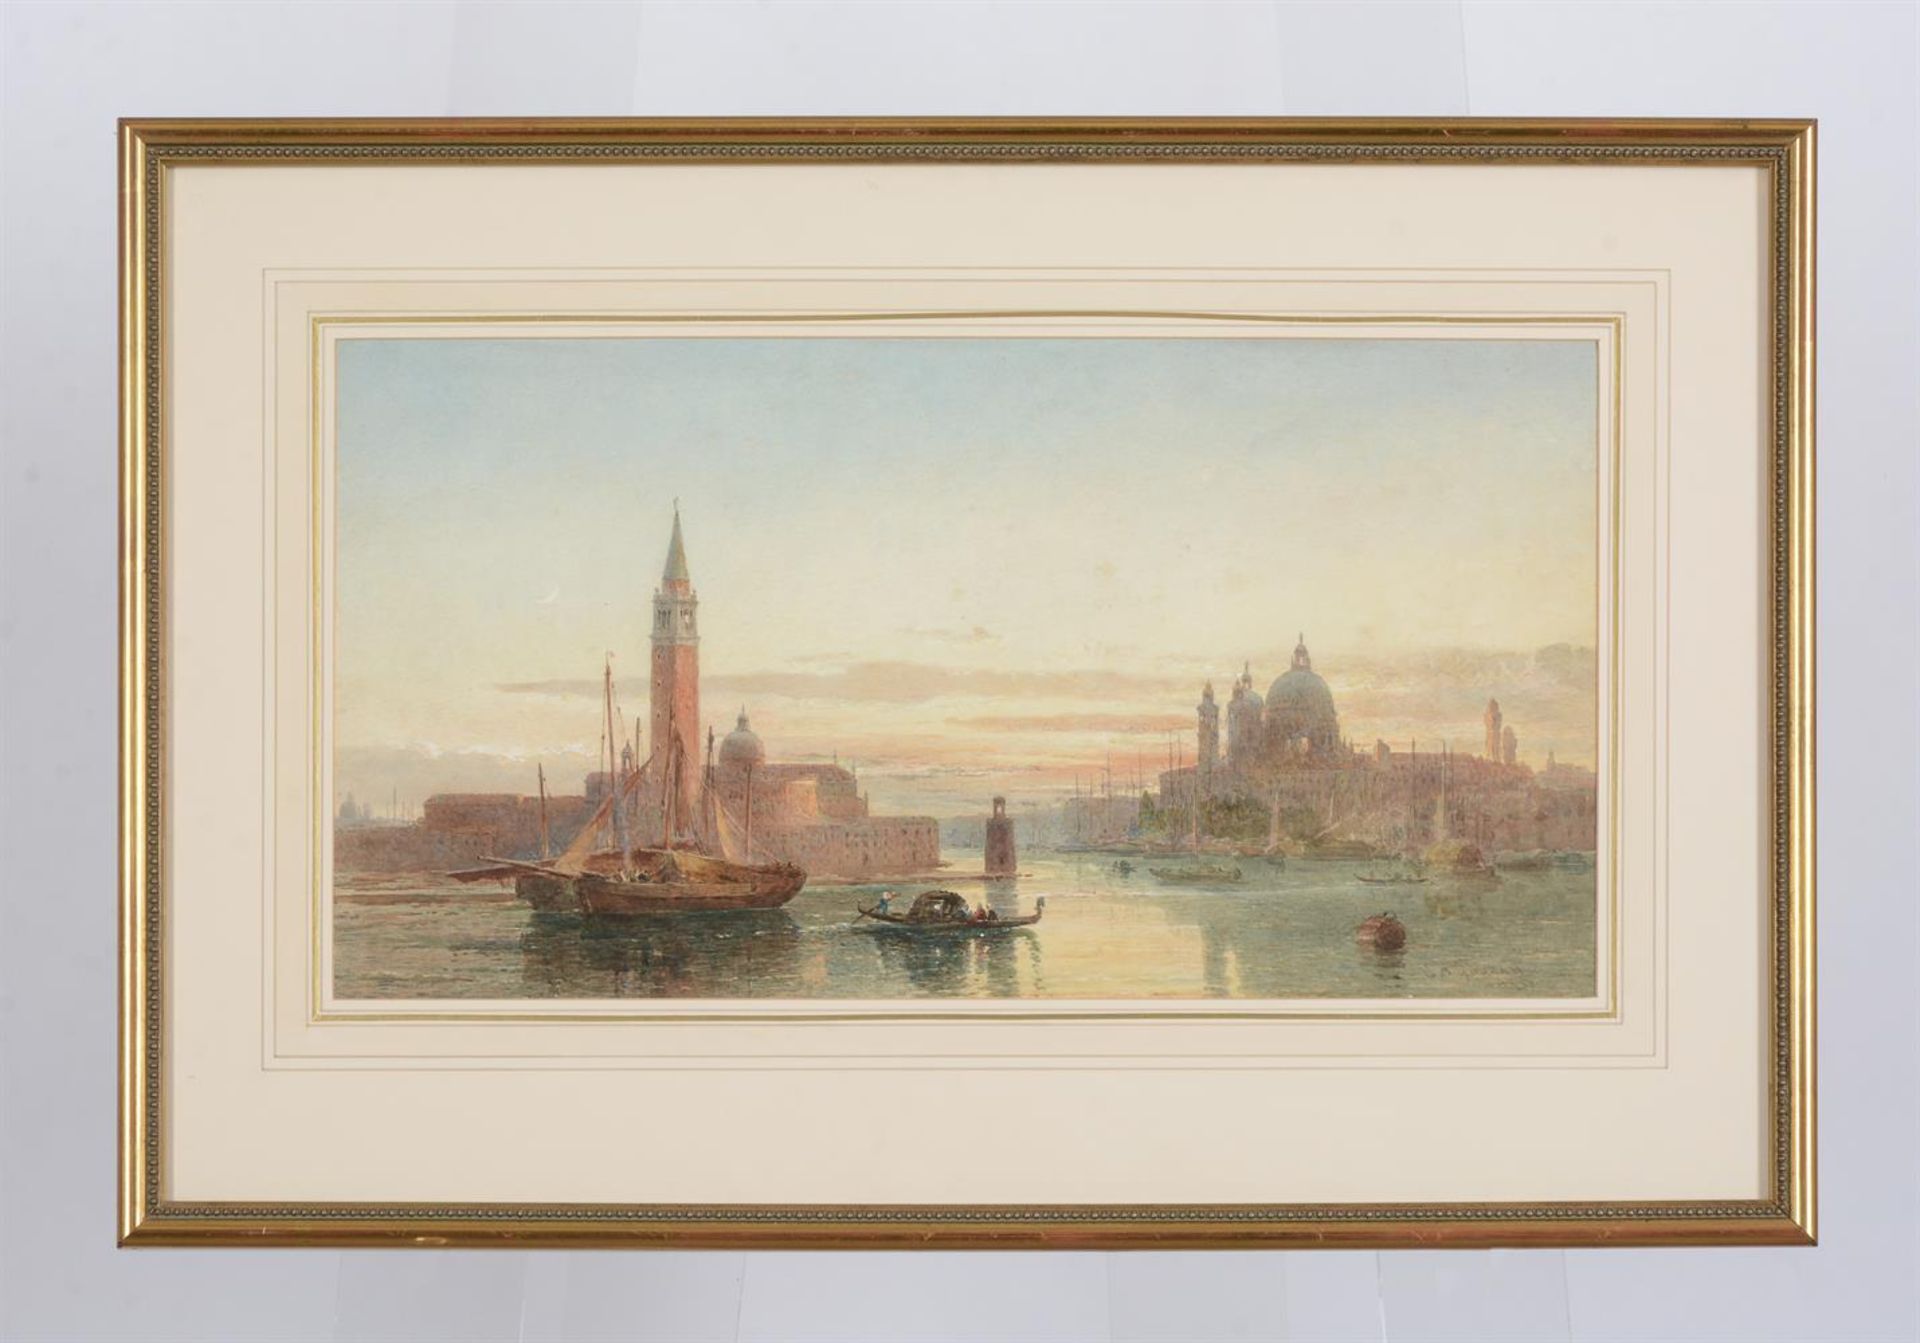 ENGLISH SCHOOL (19TH CENTURY), A VIEW OF VENICE - Image 2 of 2